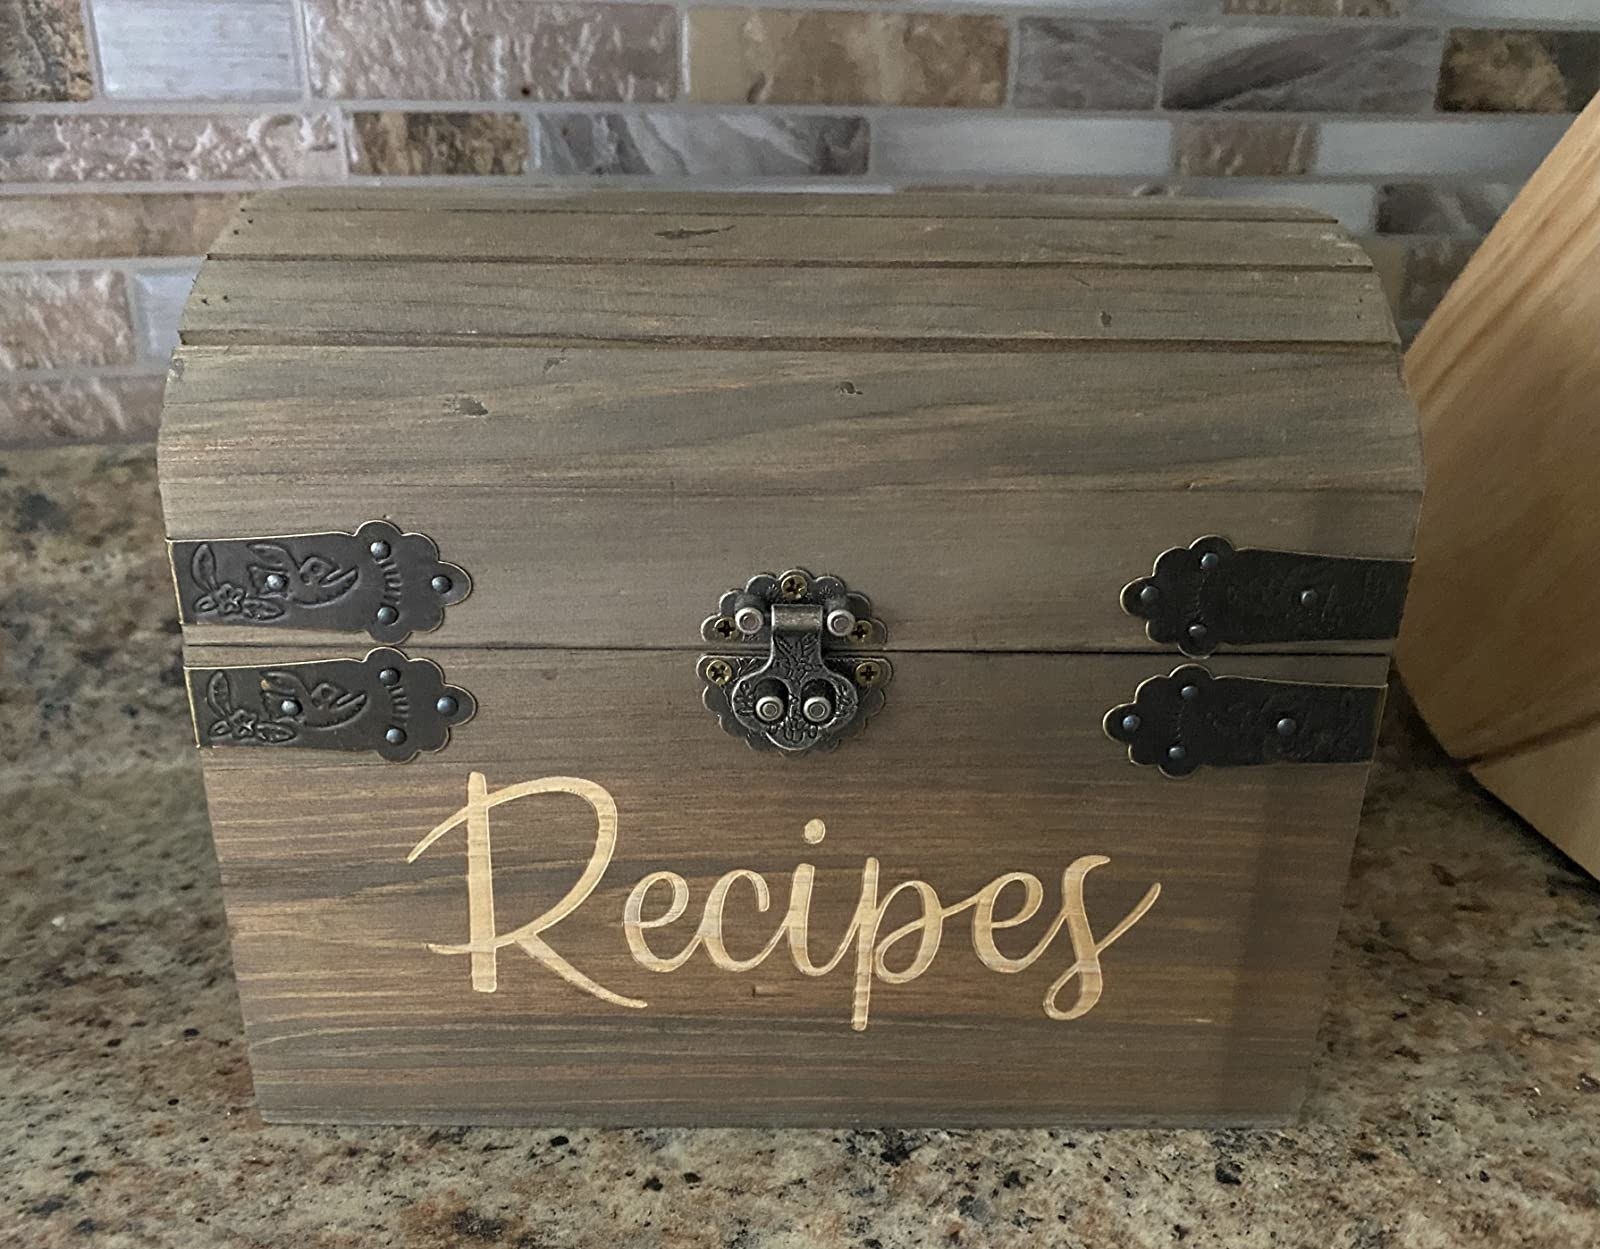 the wooden recipe box with a metal clasp and the word &quot;recipes&quot; written in light cursive on the front